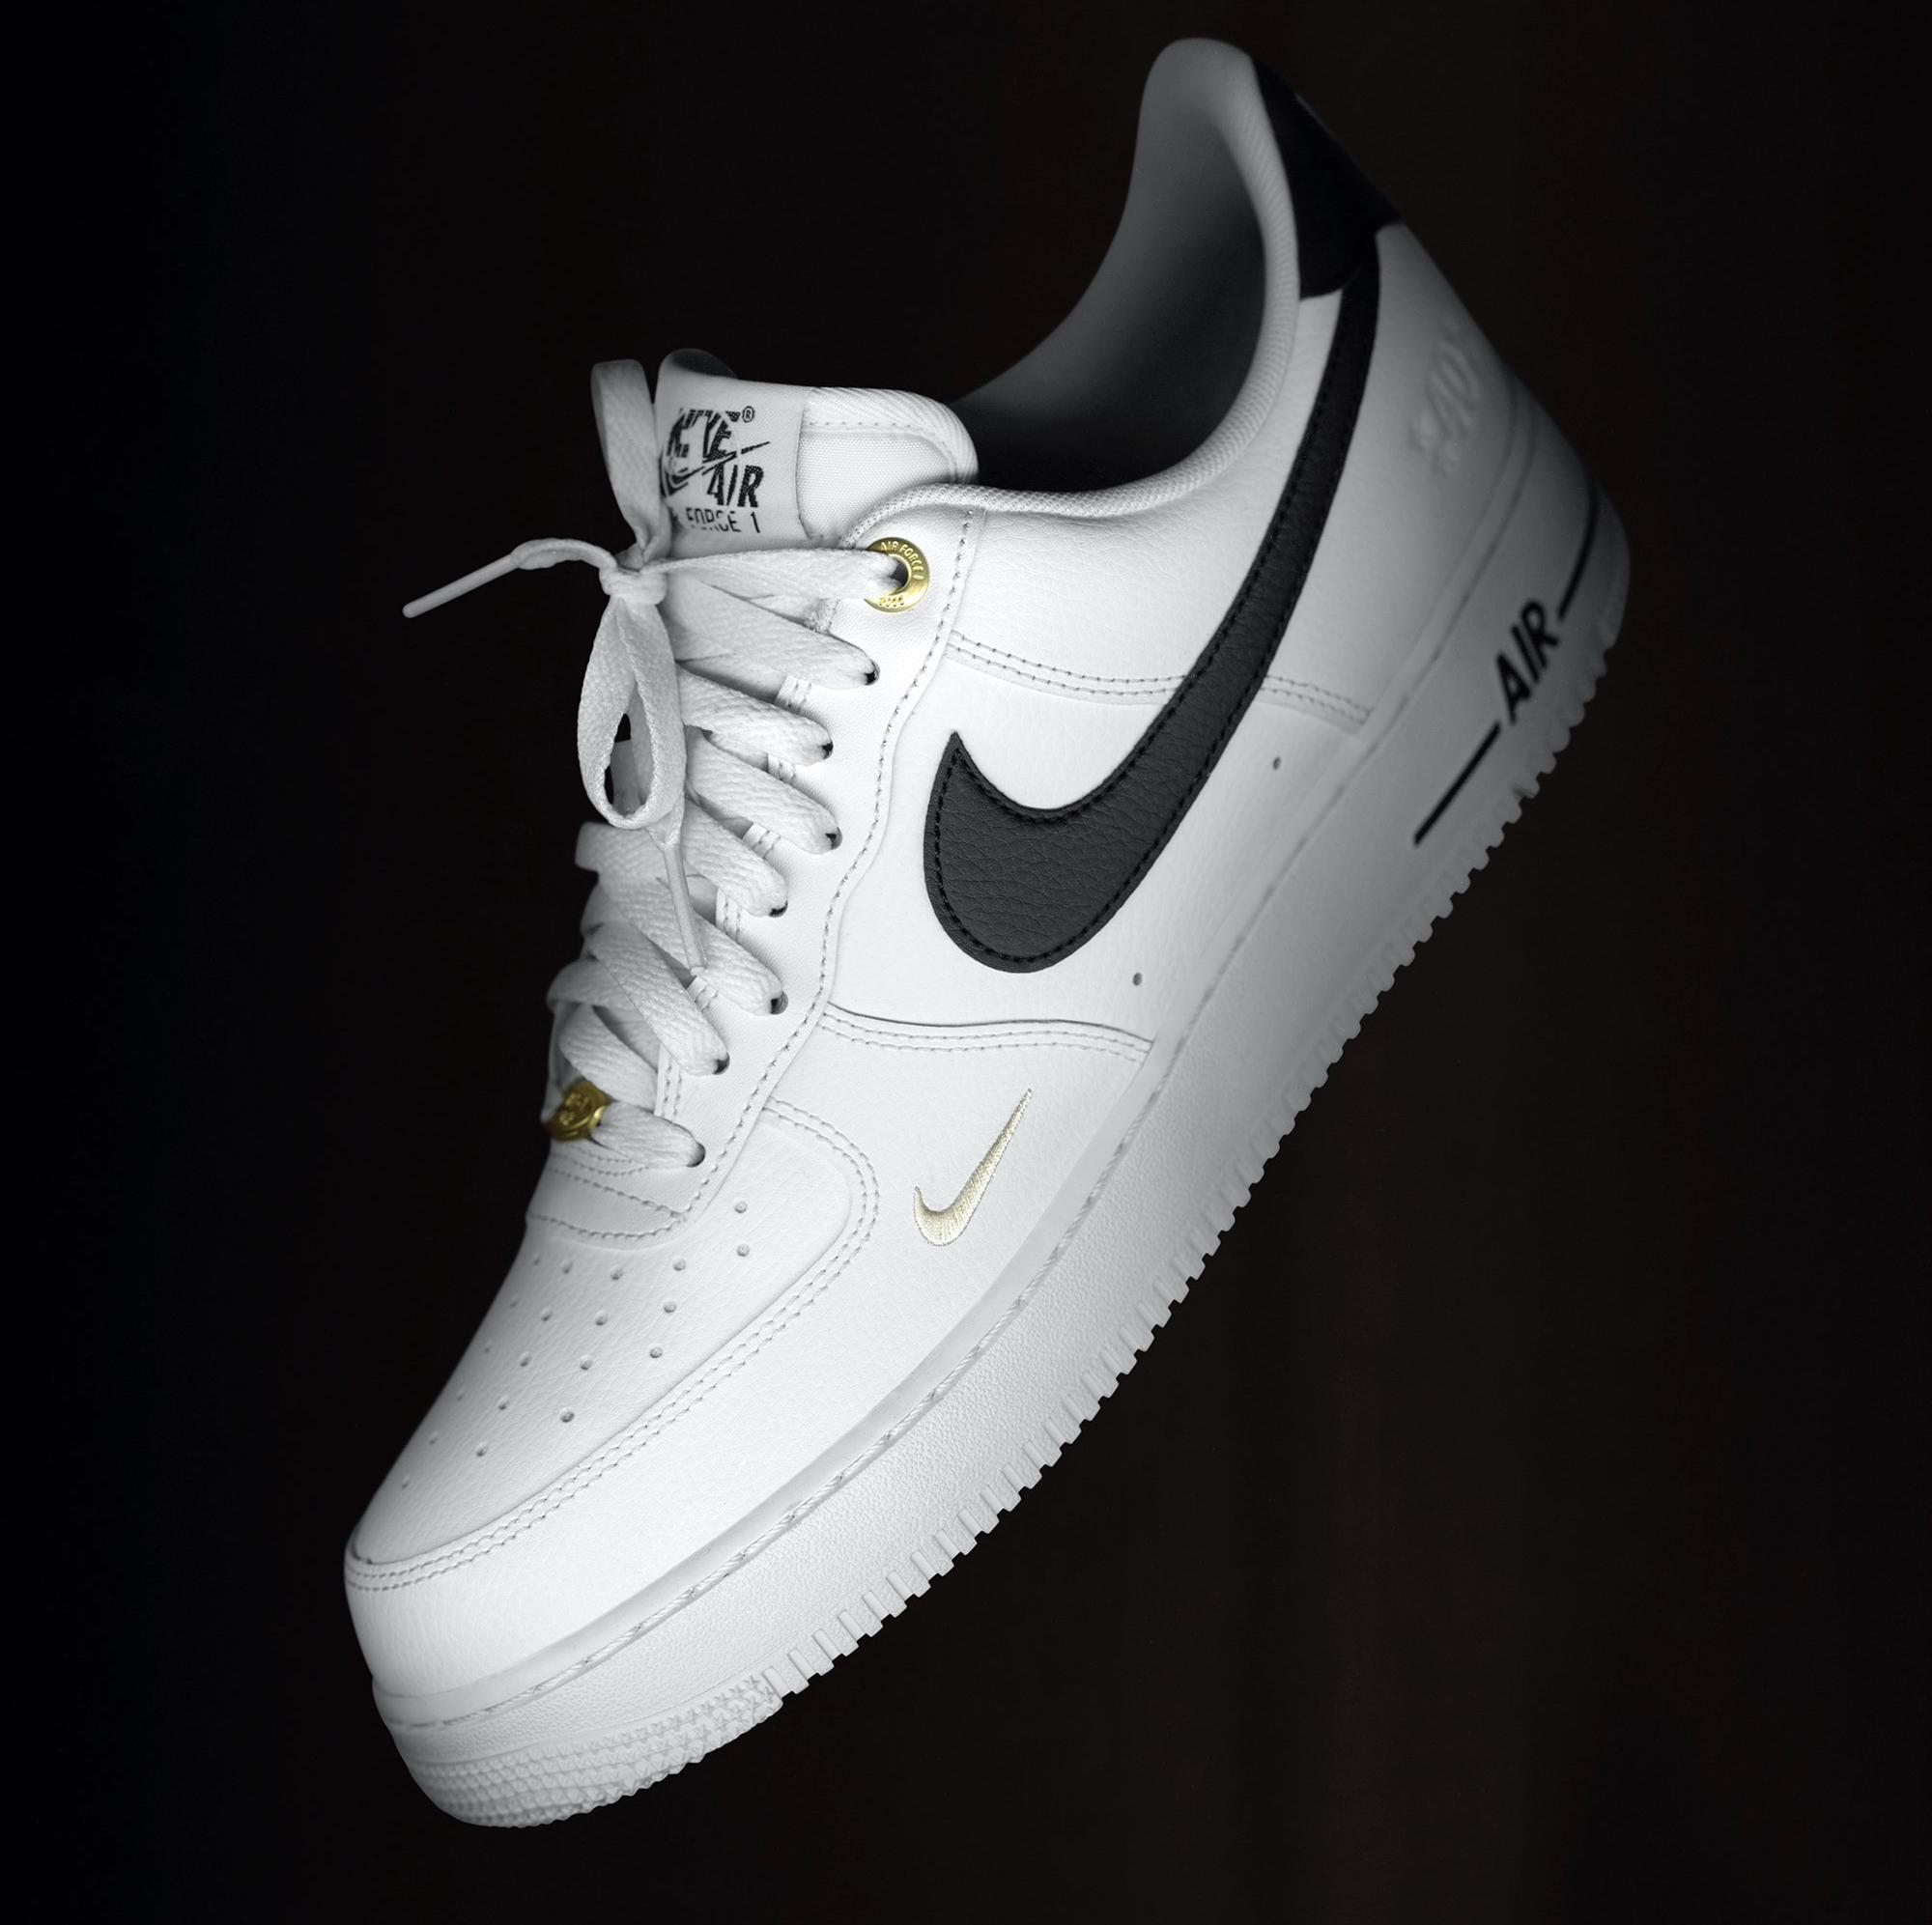 Nike Air Force 1 Low '07 LV8 40th Anniversary White BlackNike Air Force 1  Low '07 LV8 40th Anniversary White Black - OFour